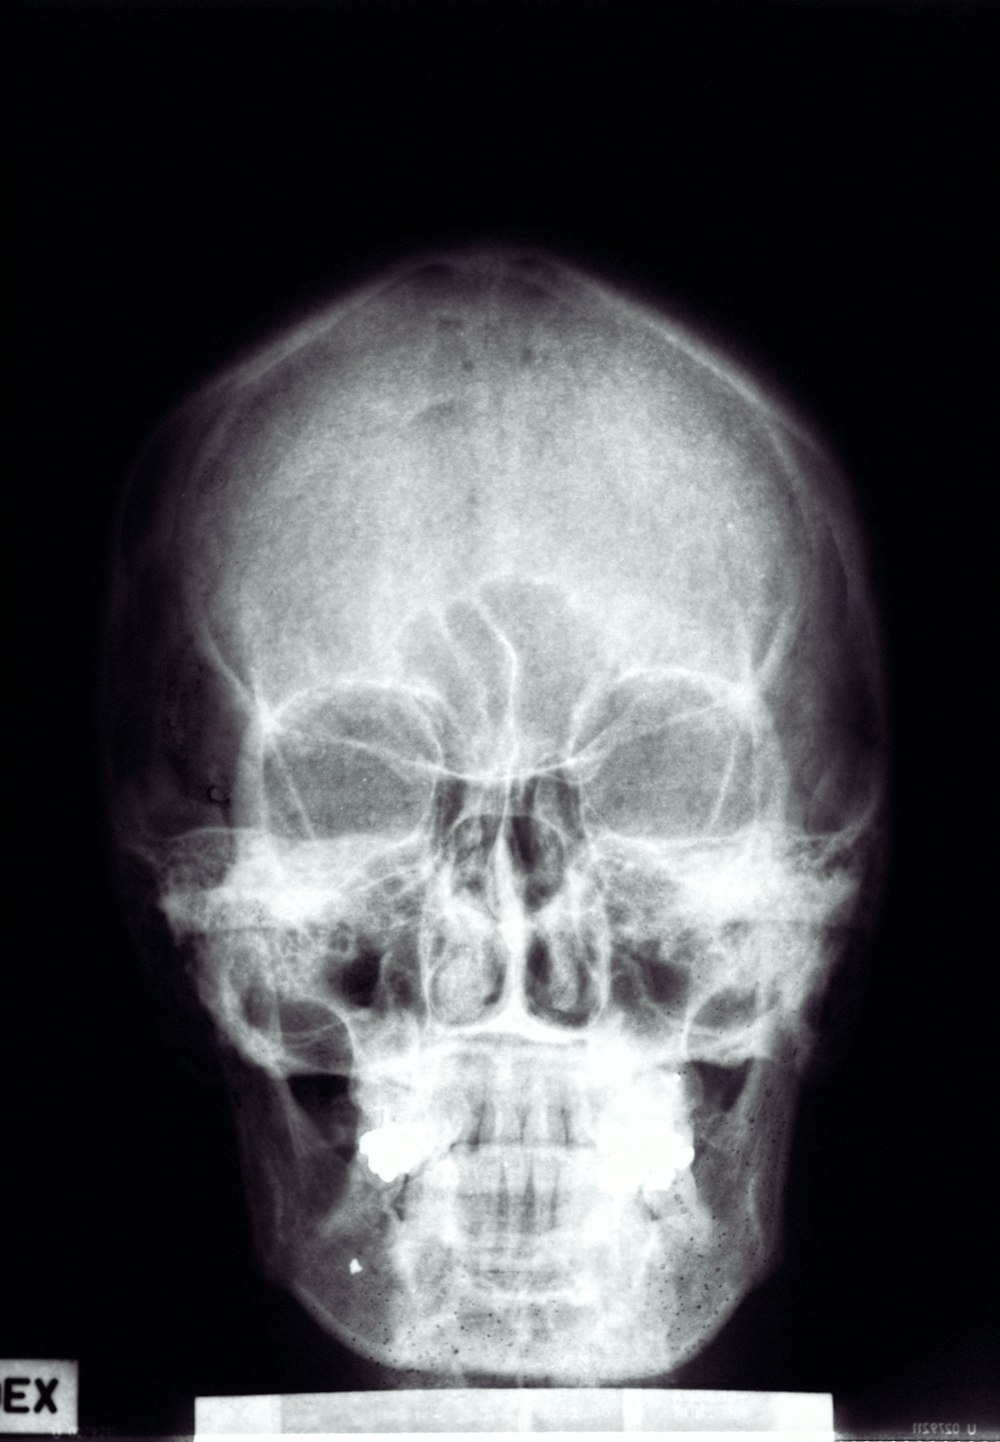 a x - ray of a human skull with a black background